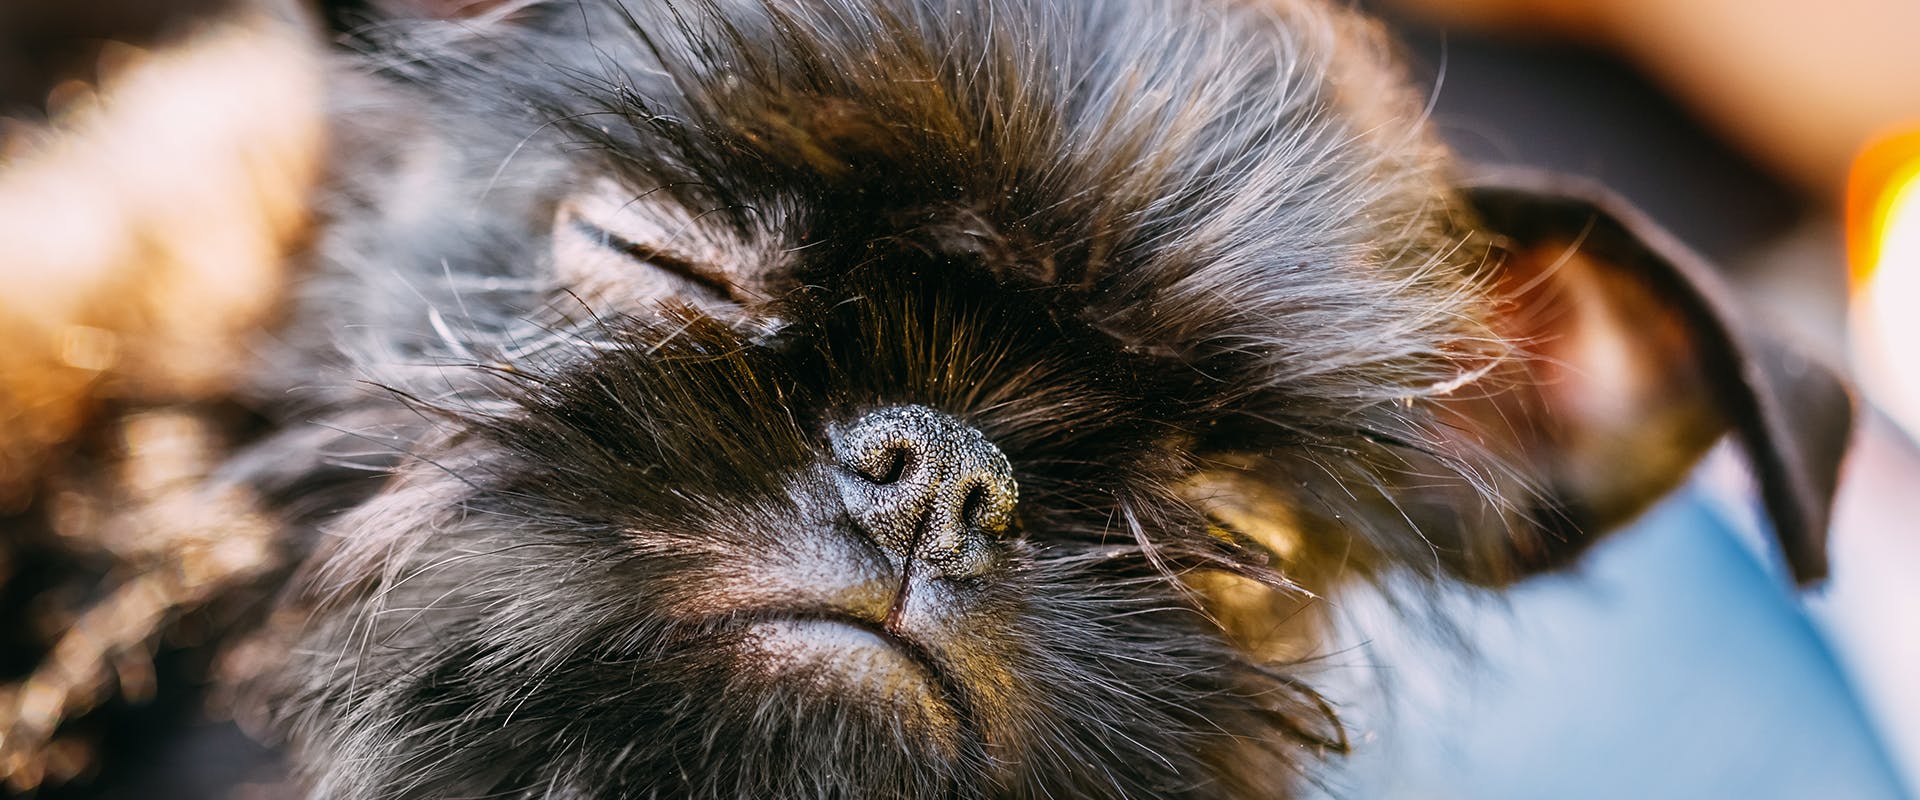 A black Brussels Griffon sleeping peacefully on a person's lap